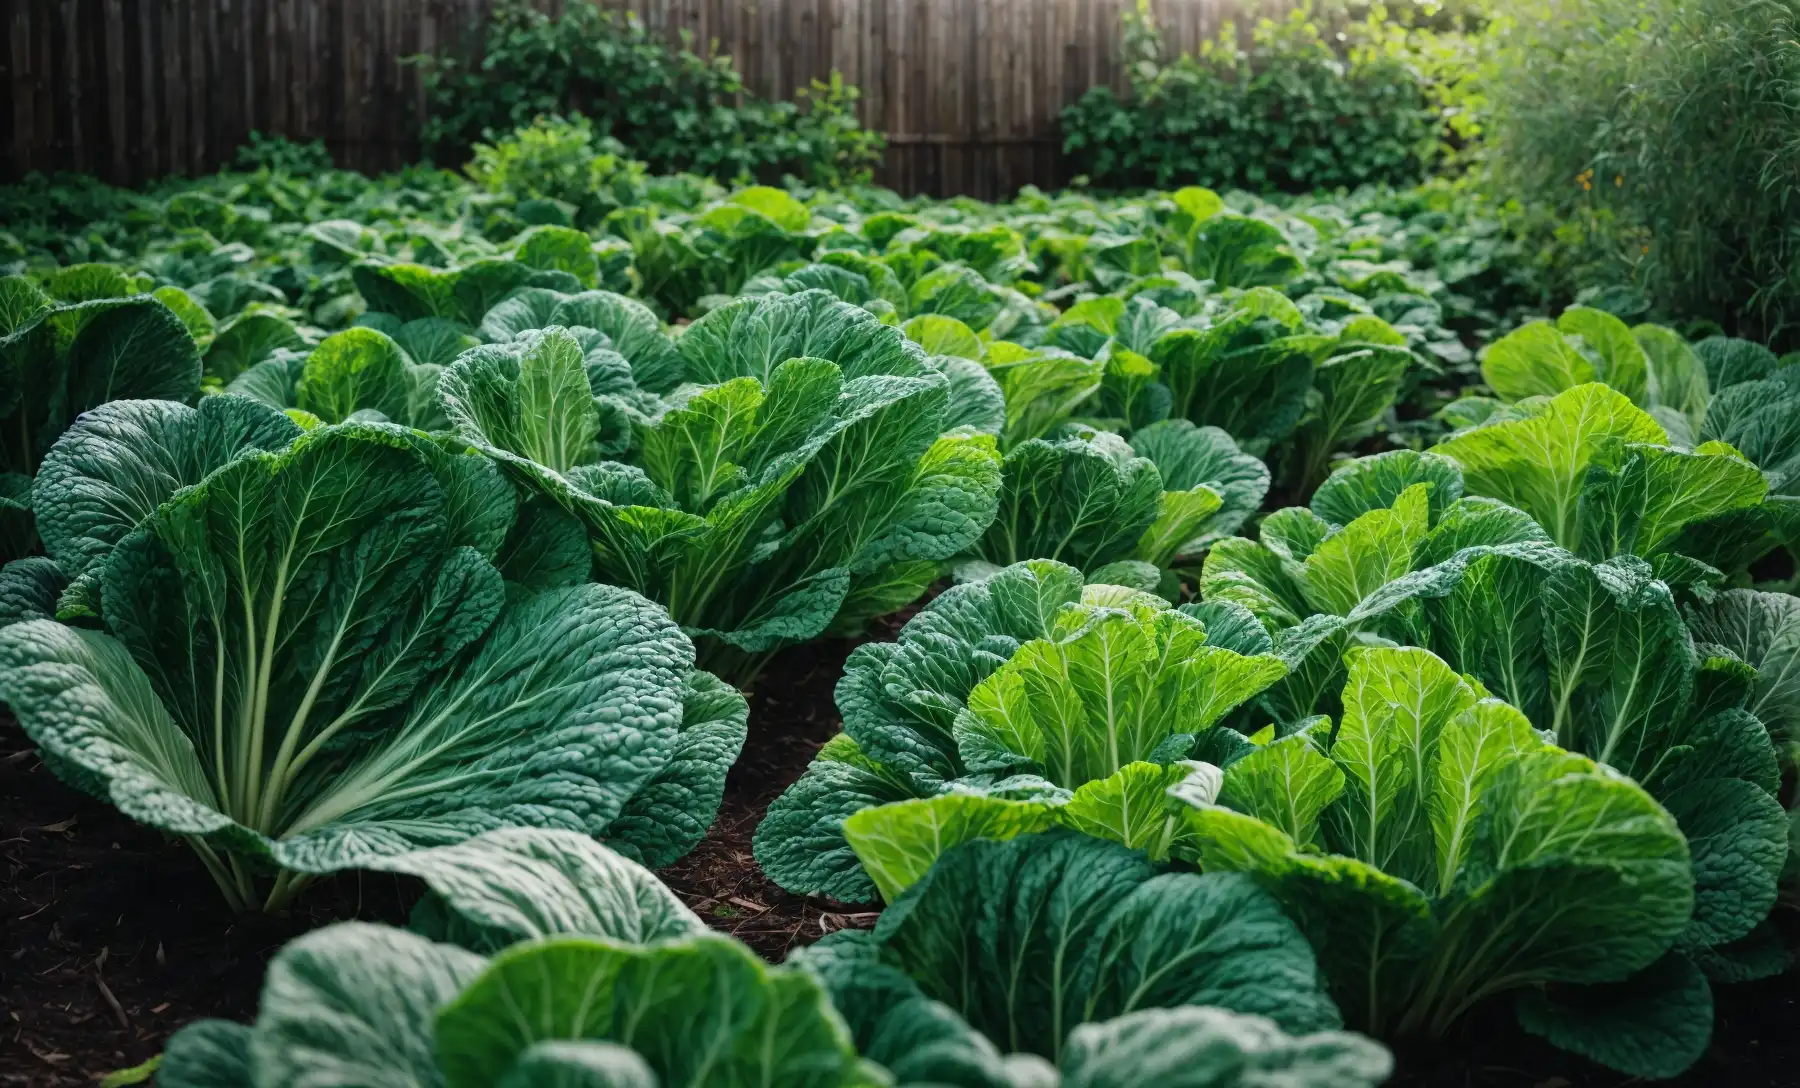 Where to Buy Cabbage Plants